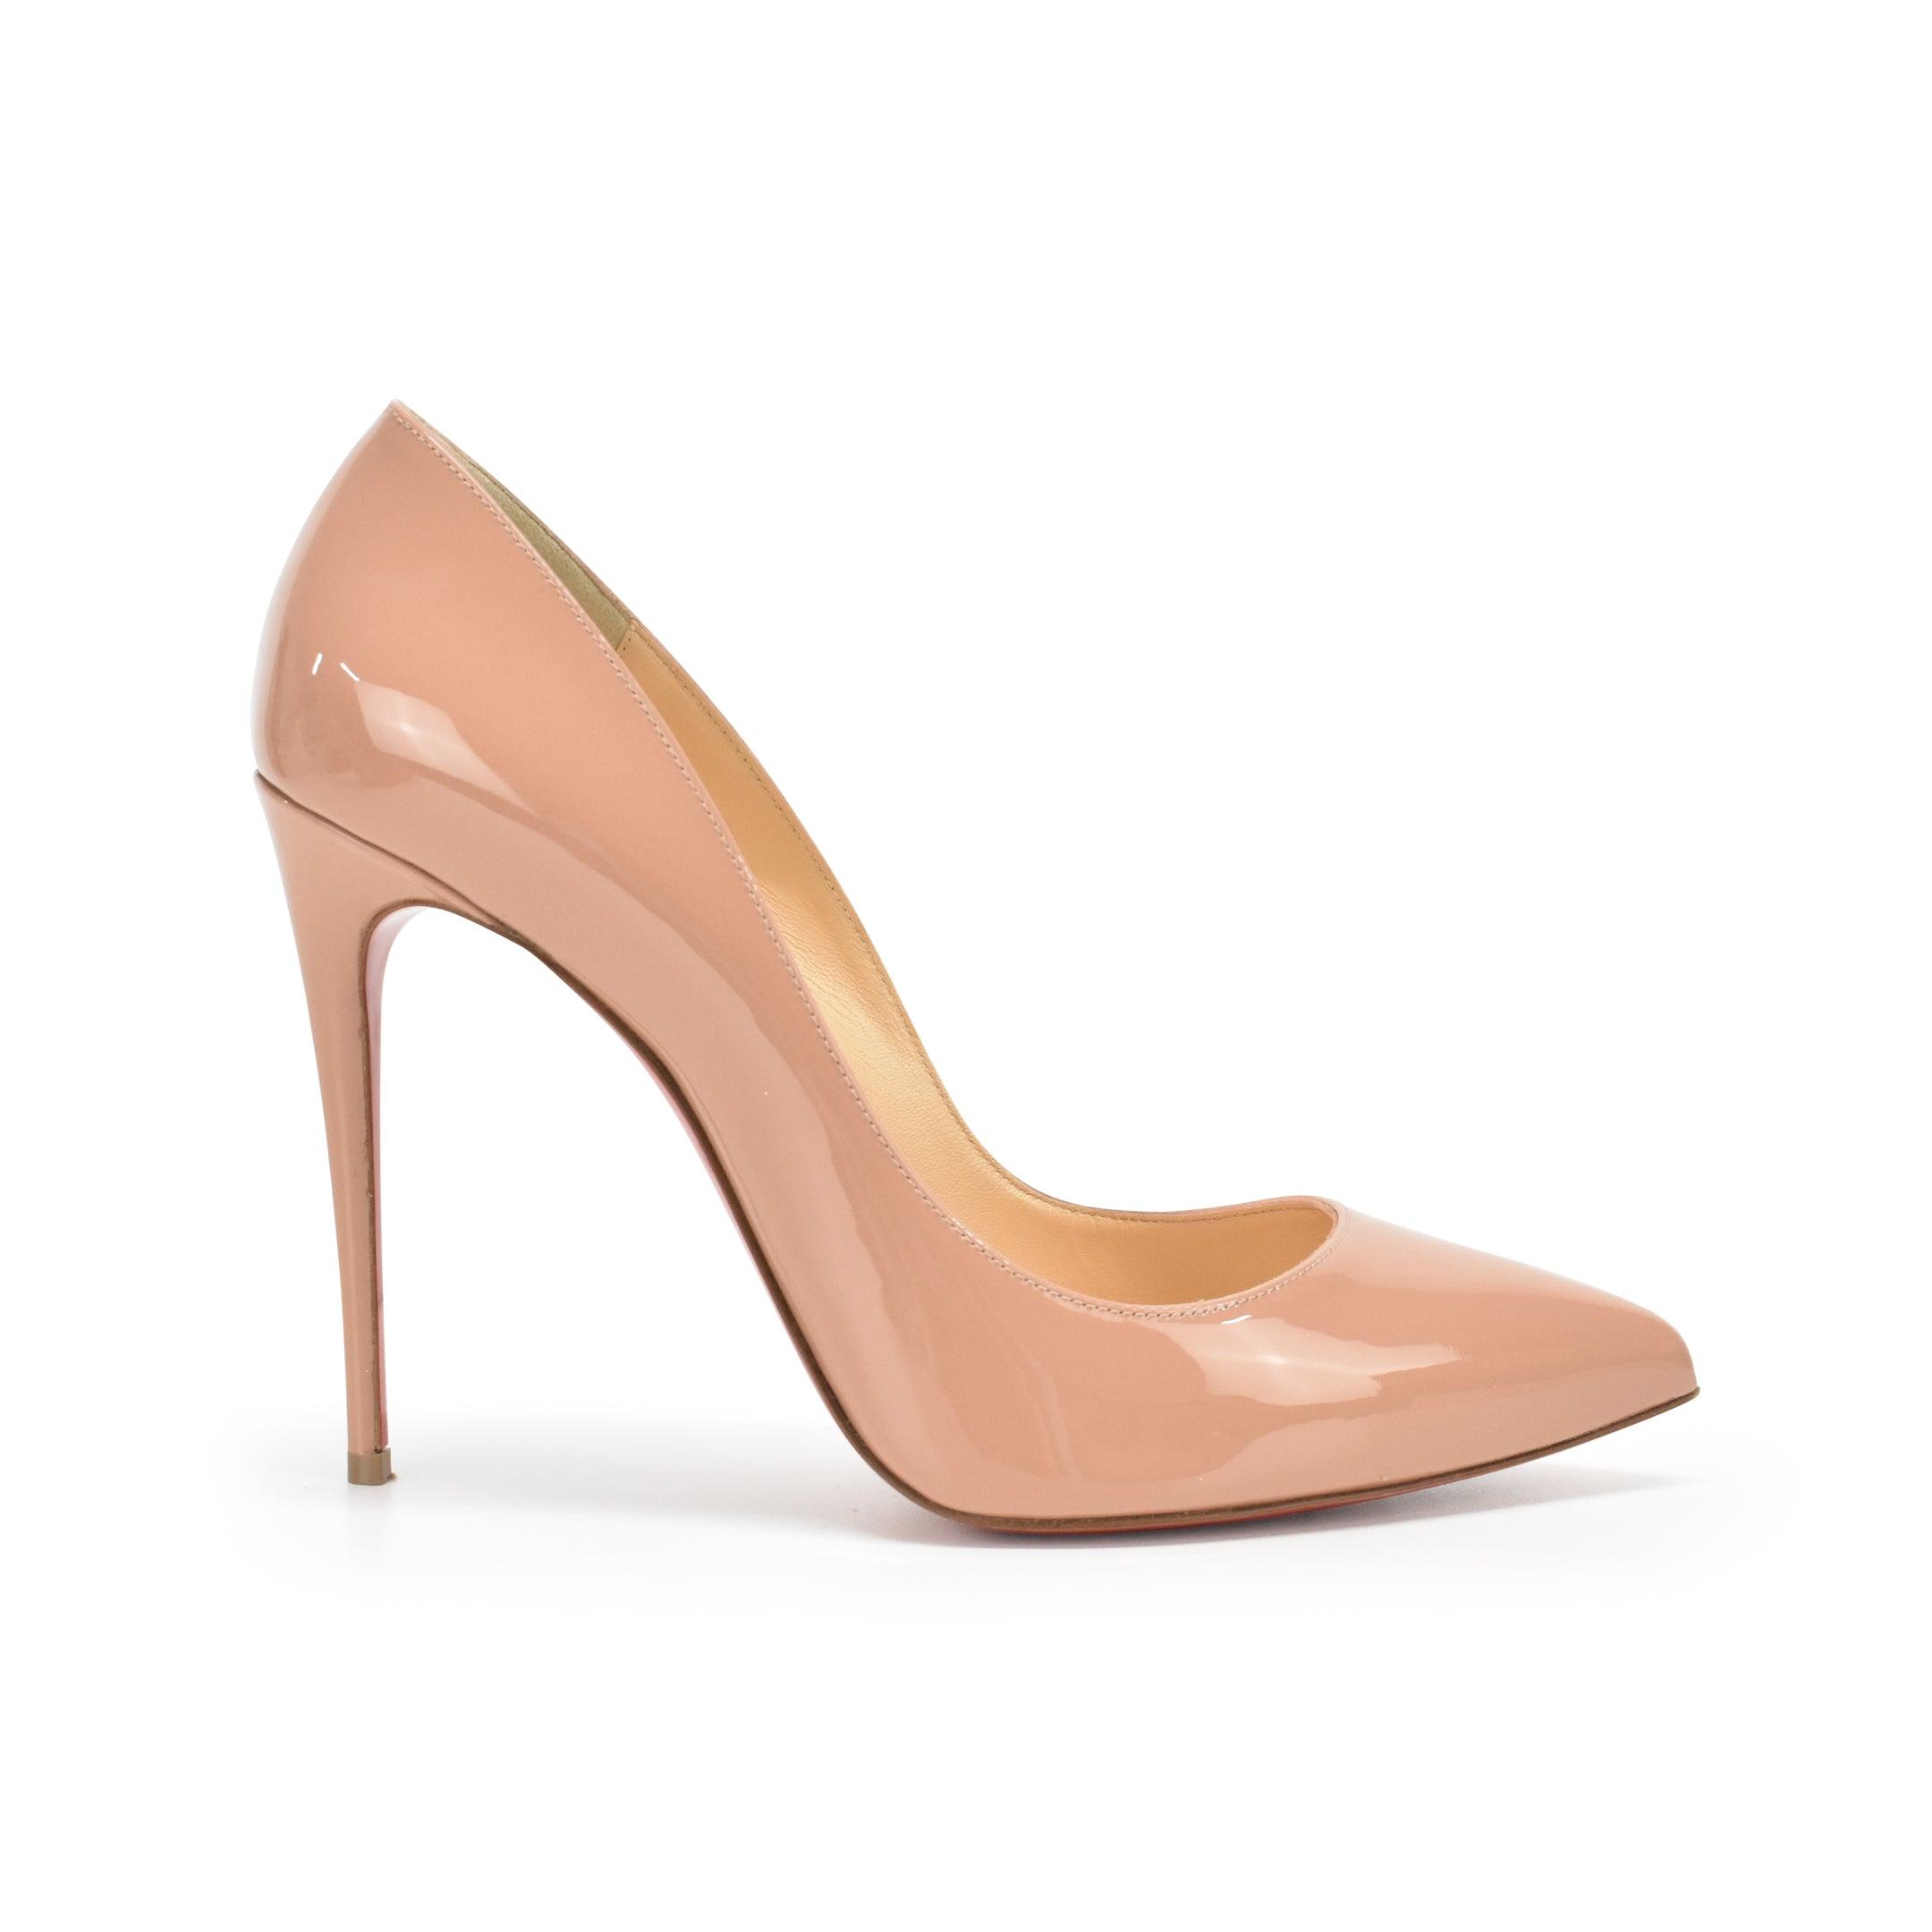 Christian Louboutin 'Pigalle' Heels - Women's 40.5 - Fashionably Yours